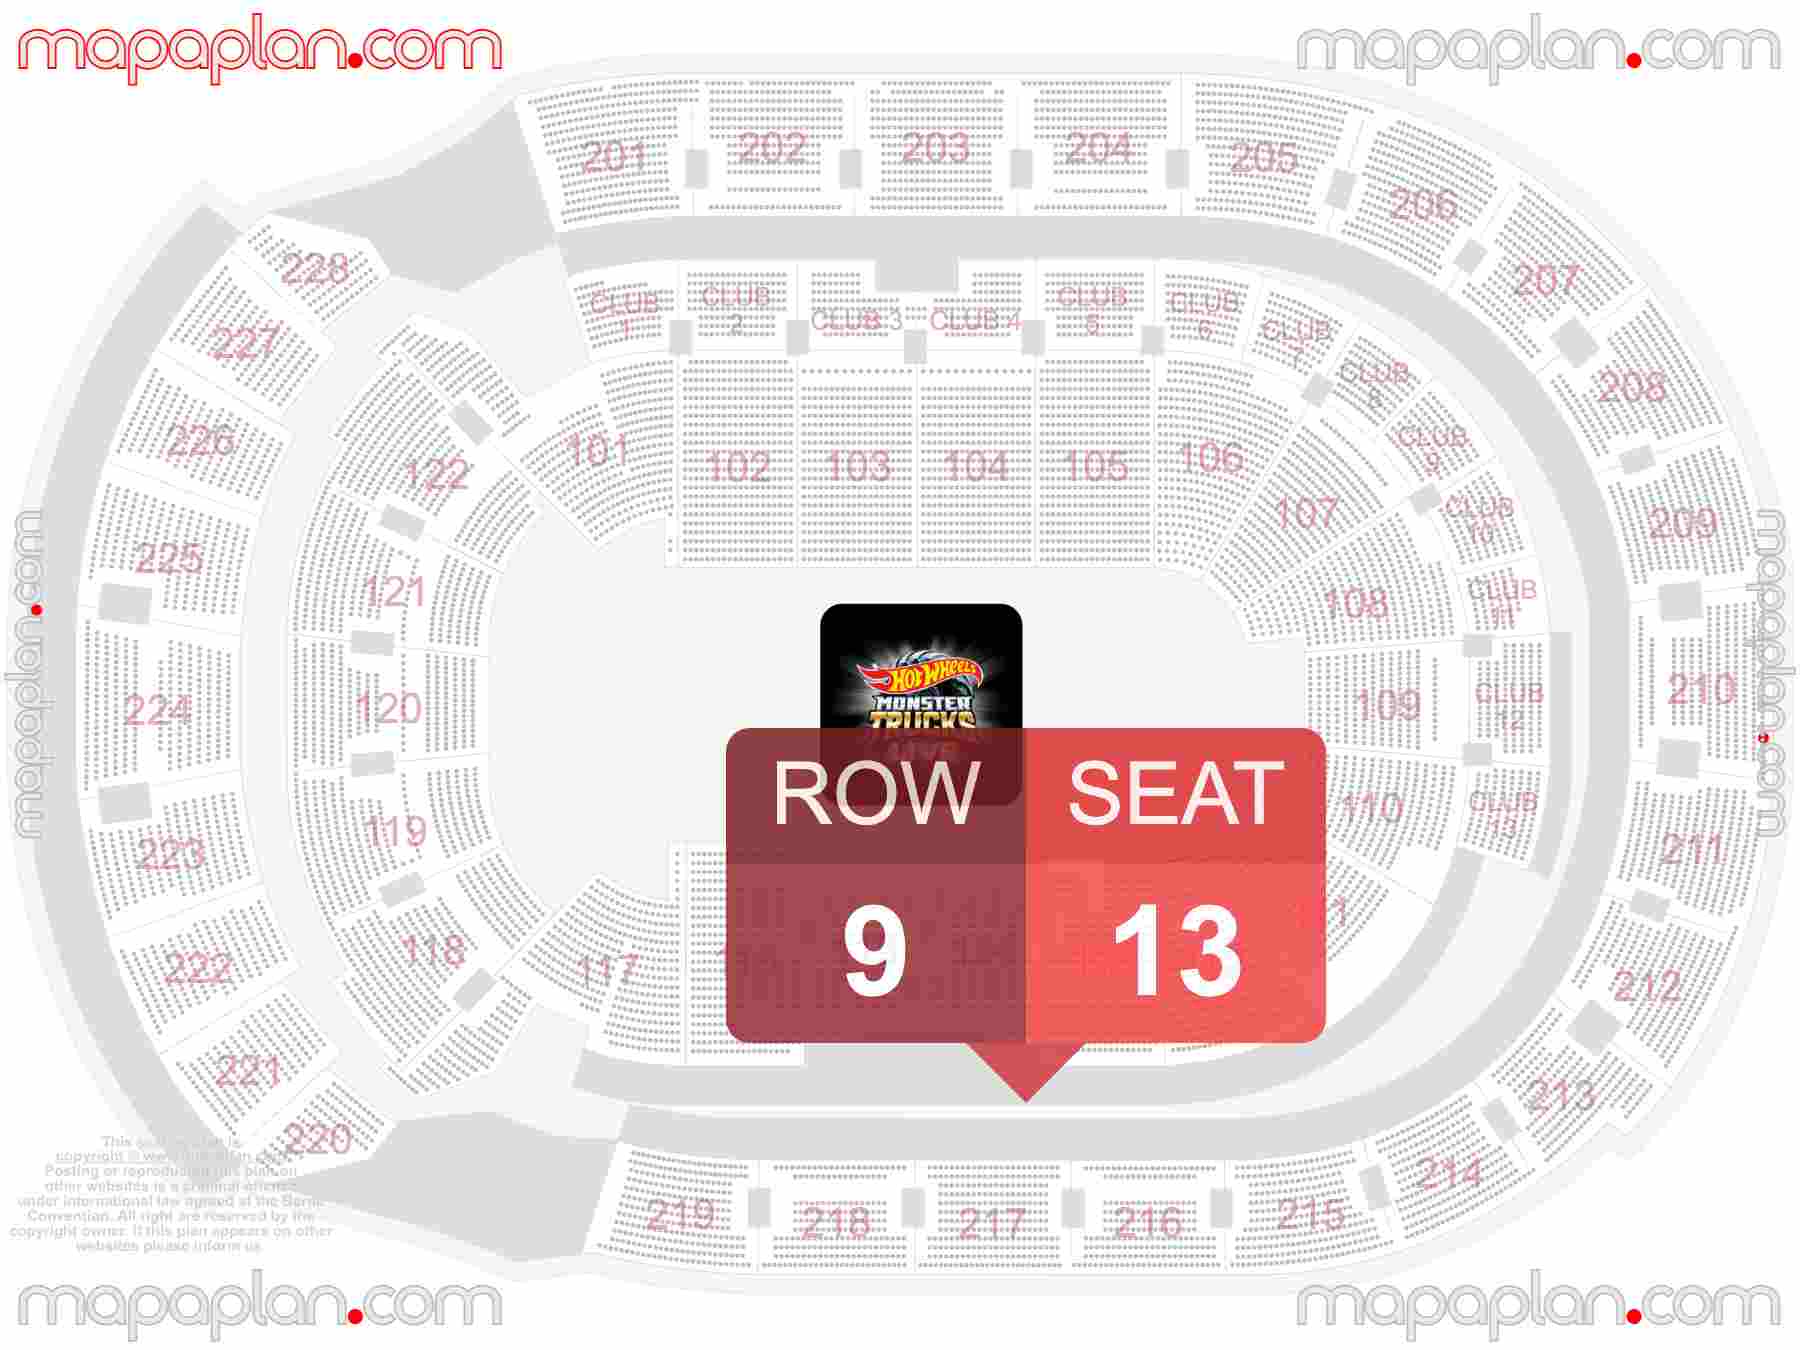 Columbus Nationwide Arena seating chart Monster trucks seating plan - Interactive map to find best seat and row numbers